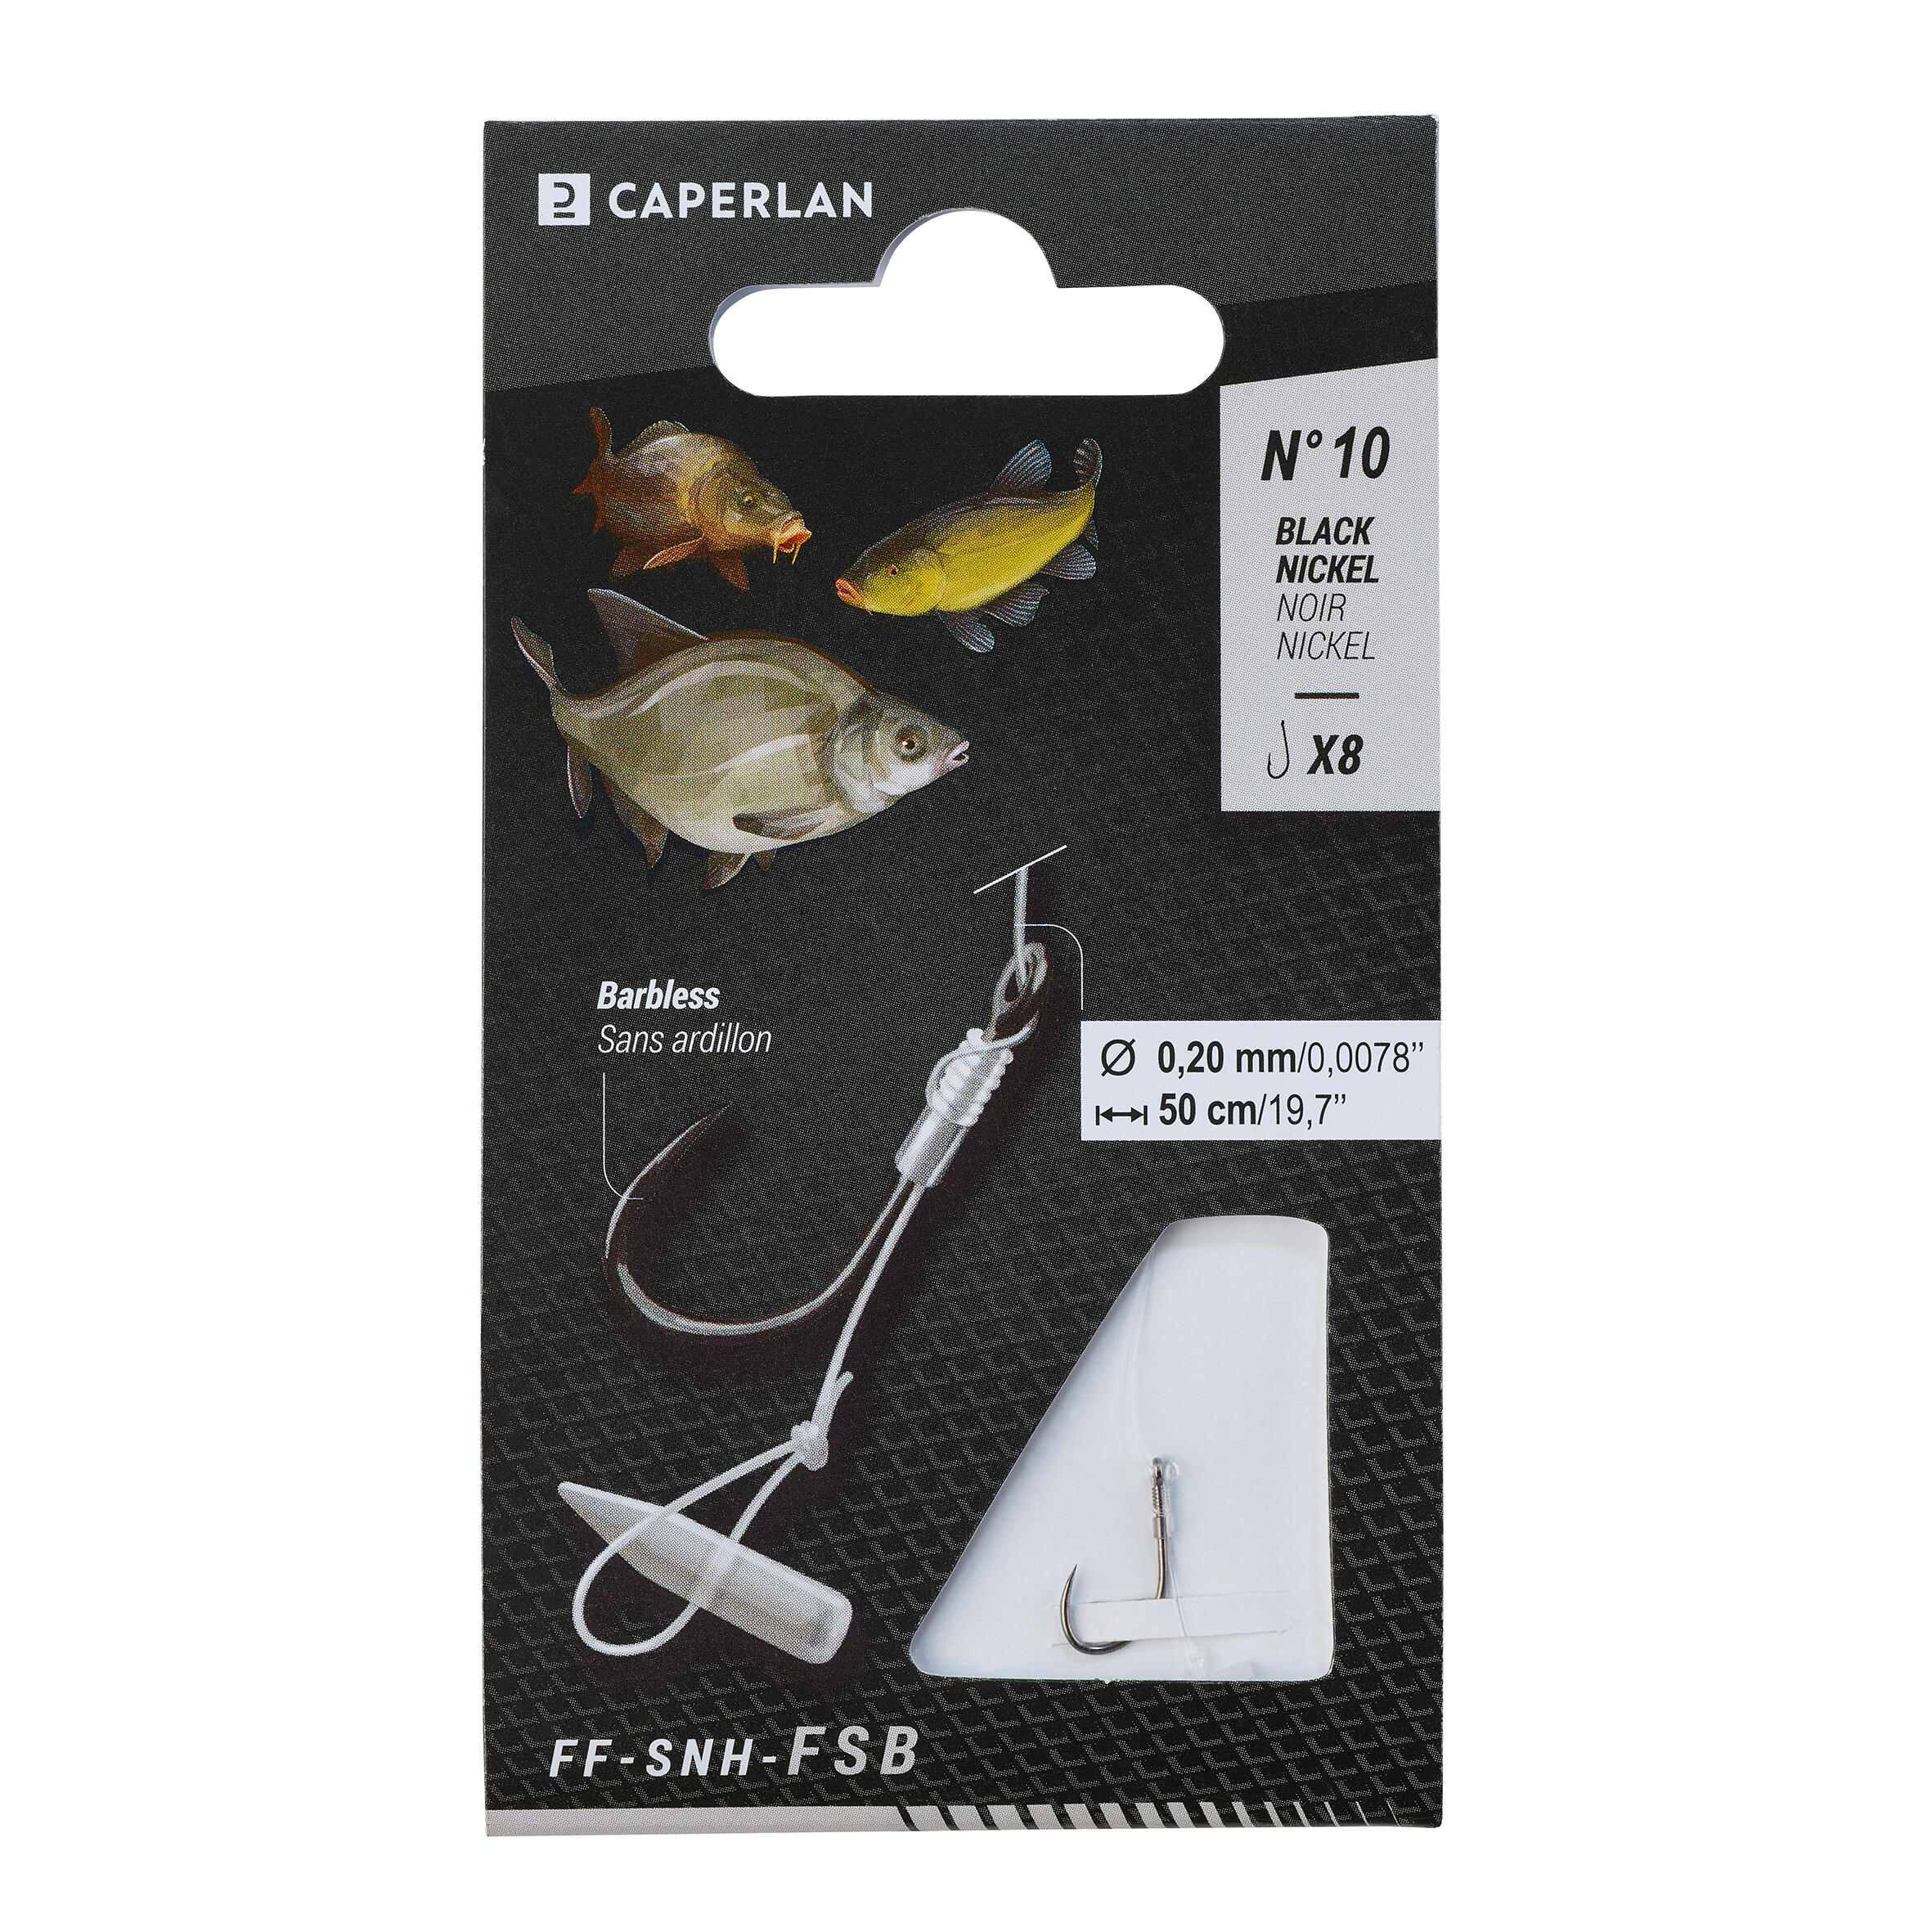 Sea fishing eyed hooks to line SN SPECIAL FOR RAZOR CLAMS - Decathlon